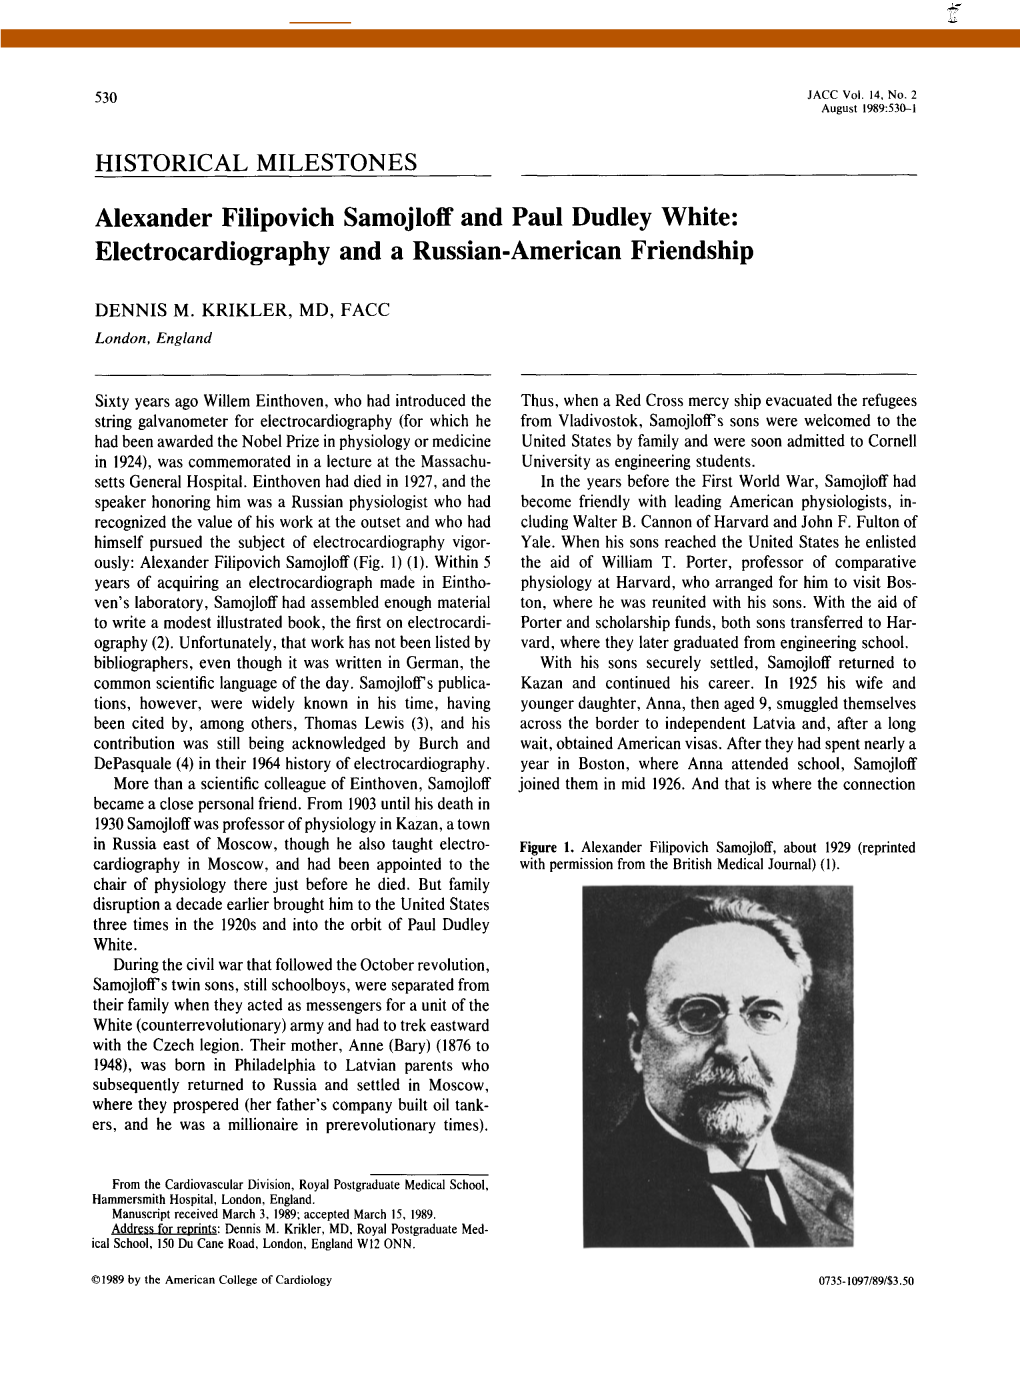 Alexander Filipovich Samojloff and Paul Dudley White : Electrocardiography and a Russian-American Friendship